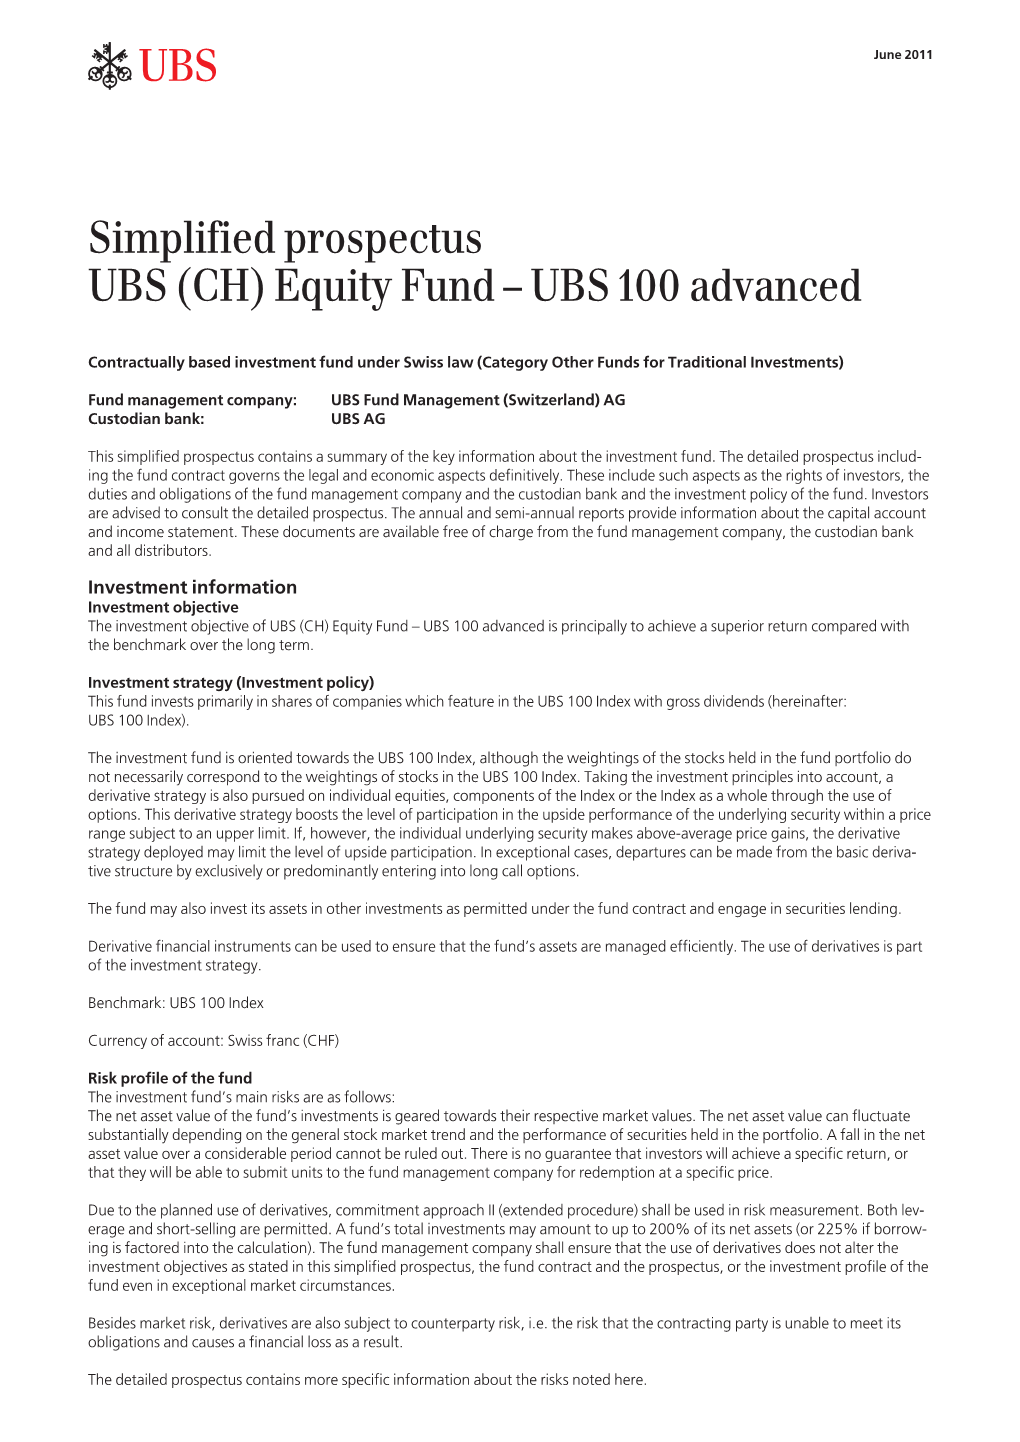 Simplified Prospectus UBS (CH) Equity Fund – UBS 100 Advanced